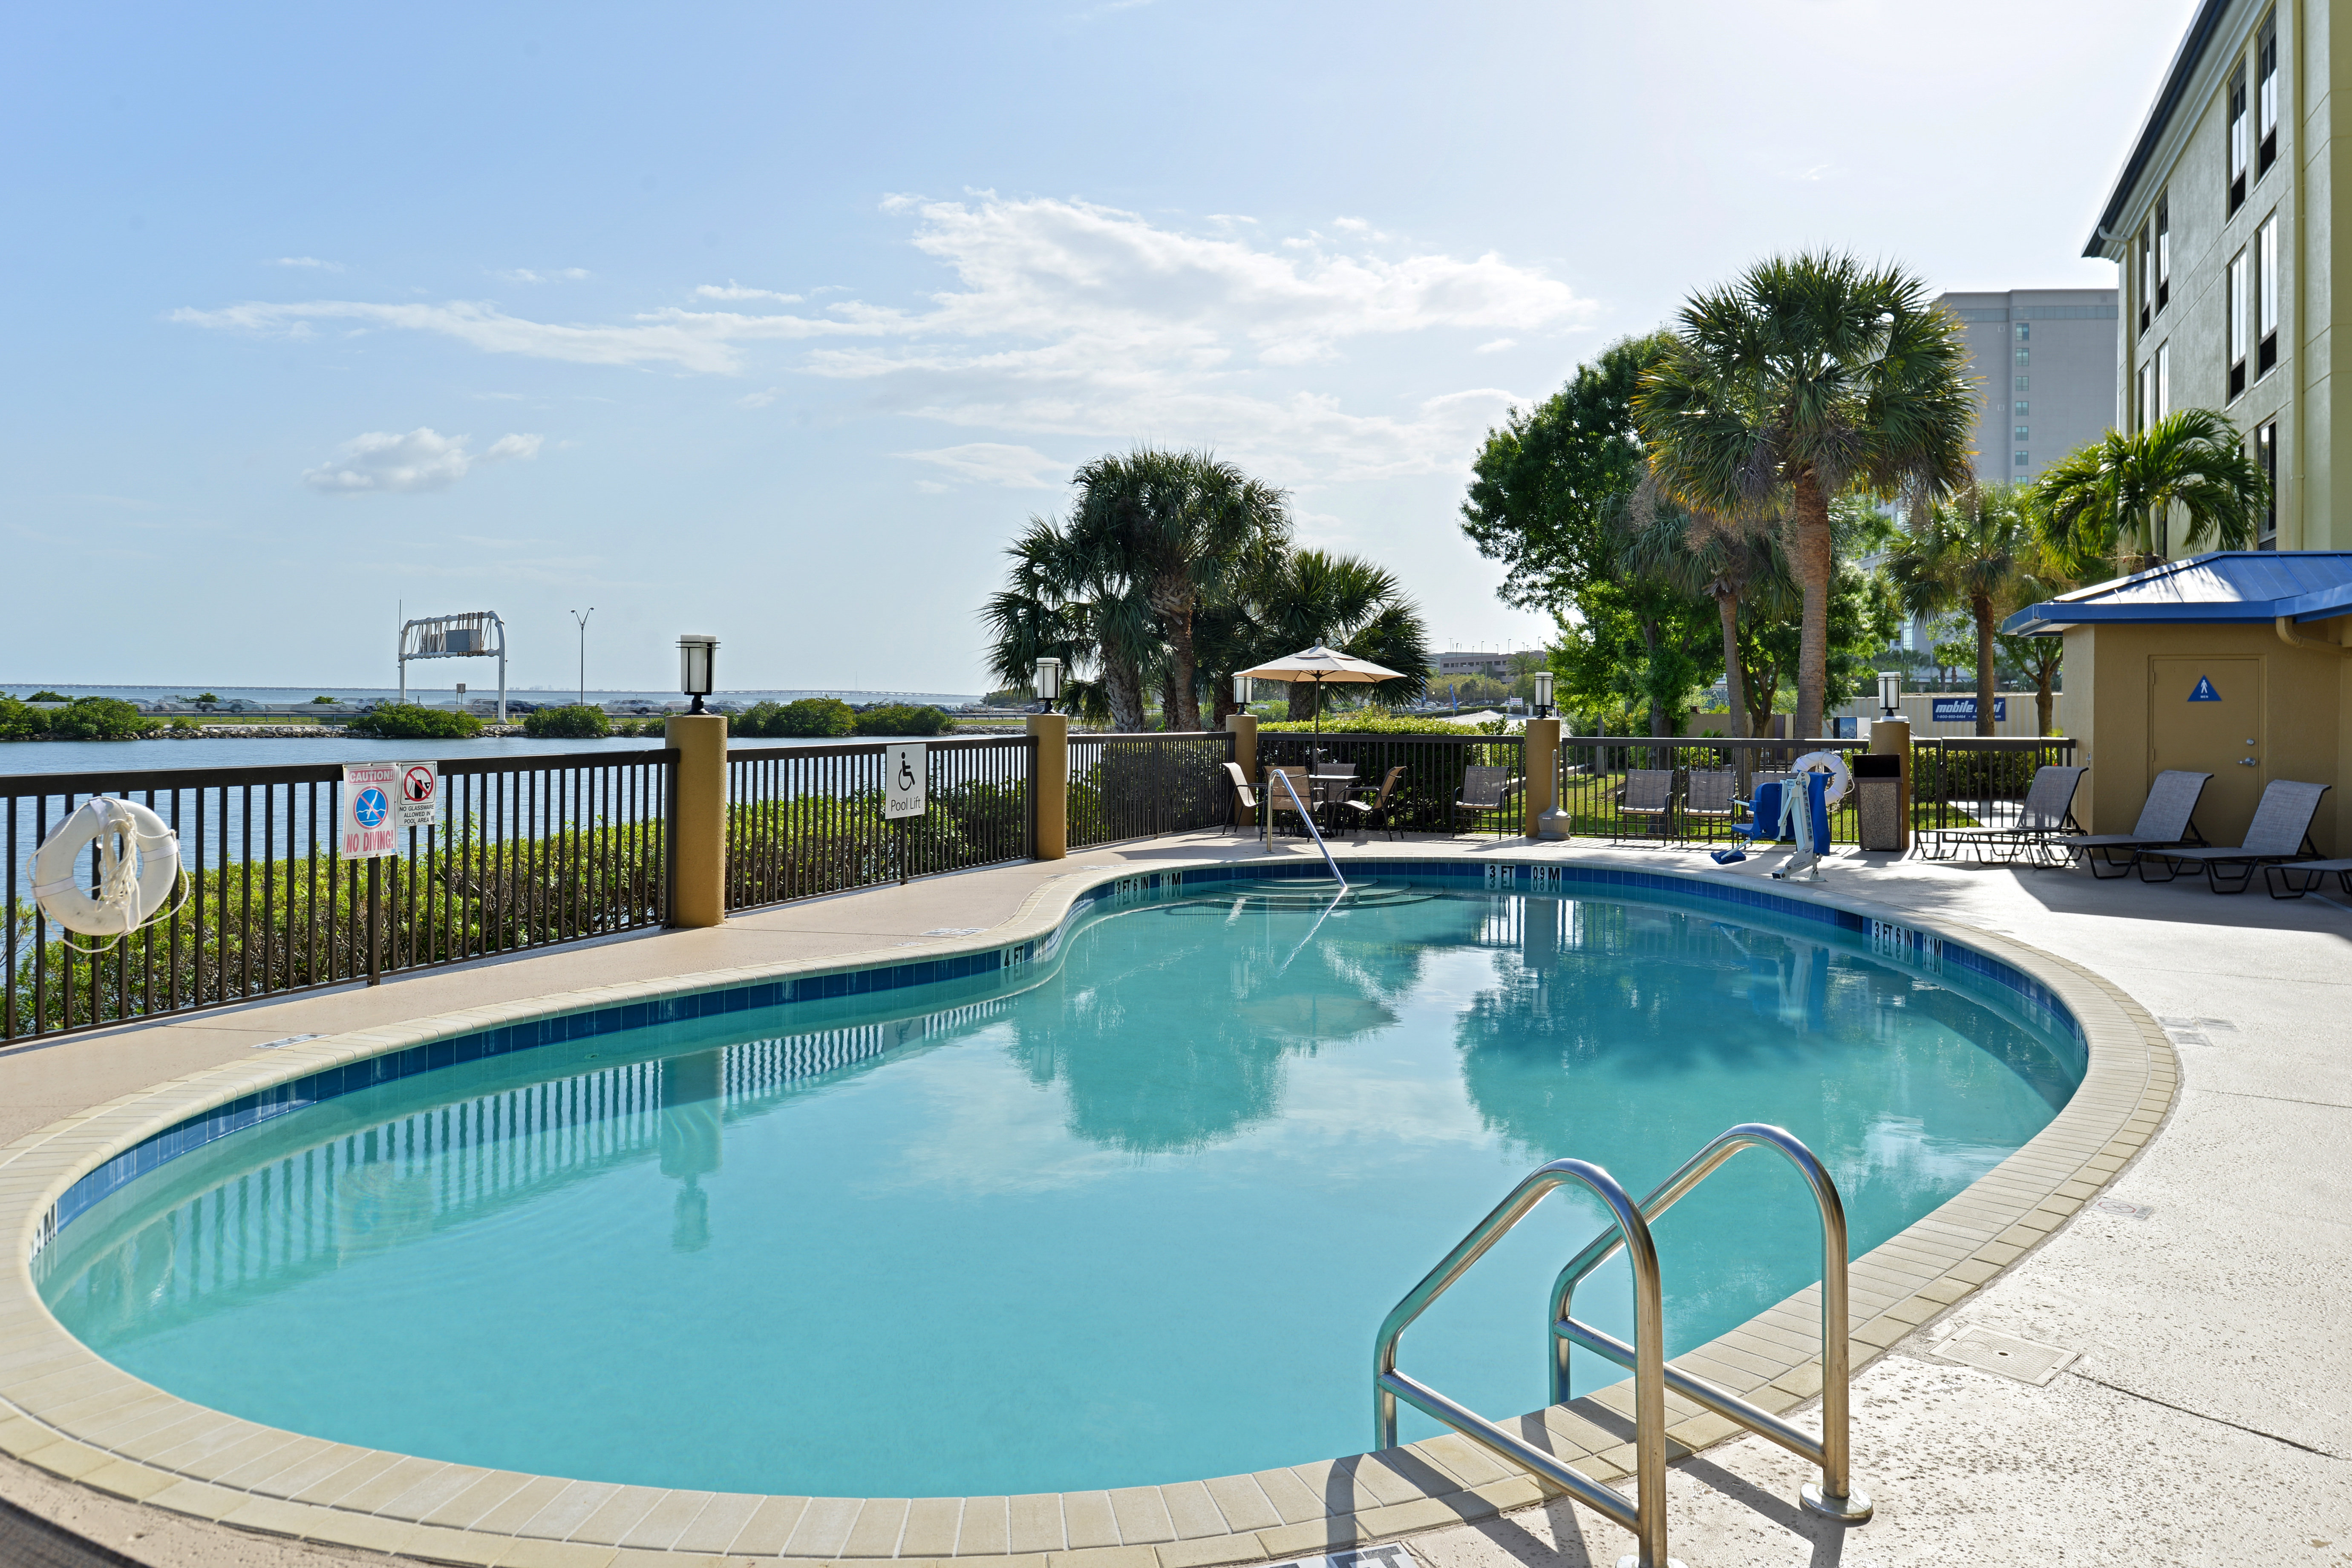 Outdoor pool over looking the beautiful waters of Tampa Bay